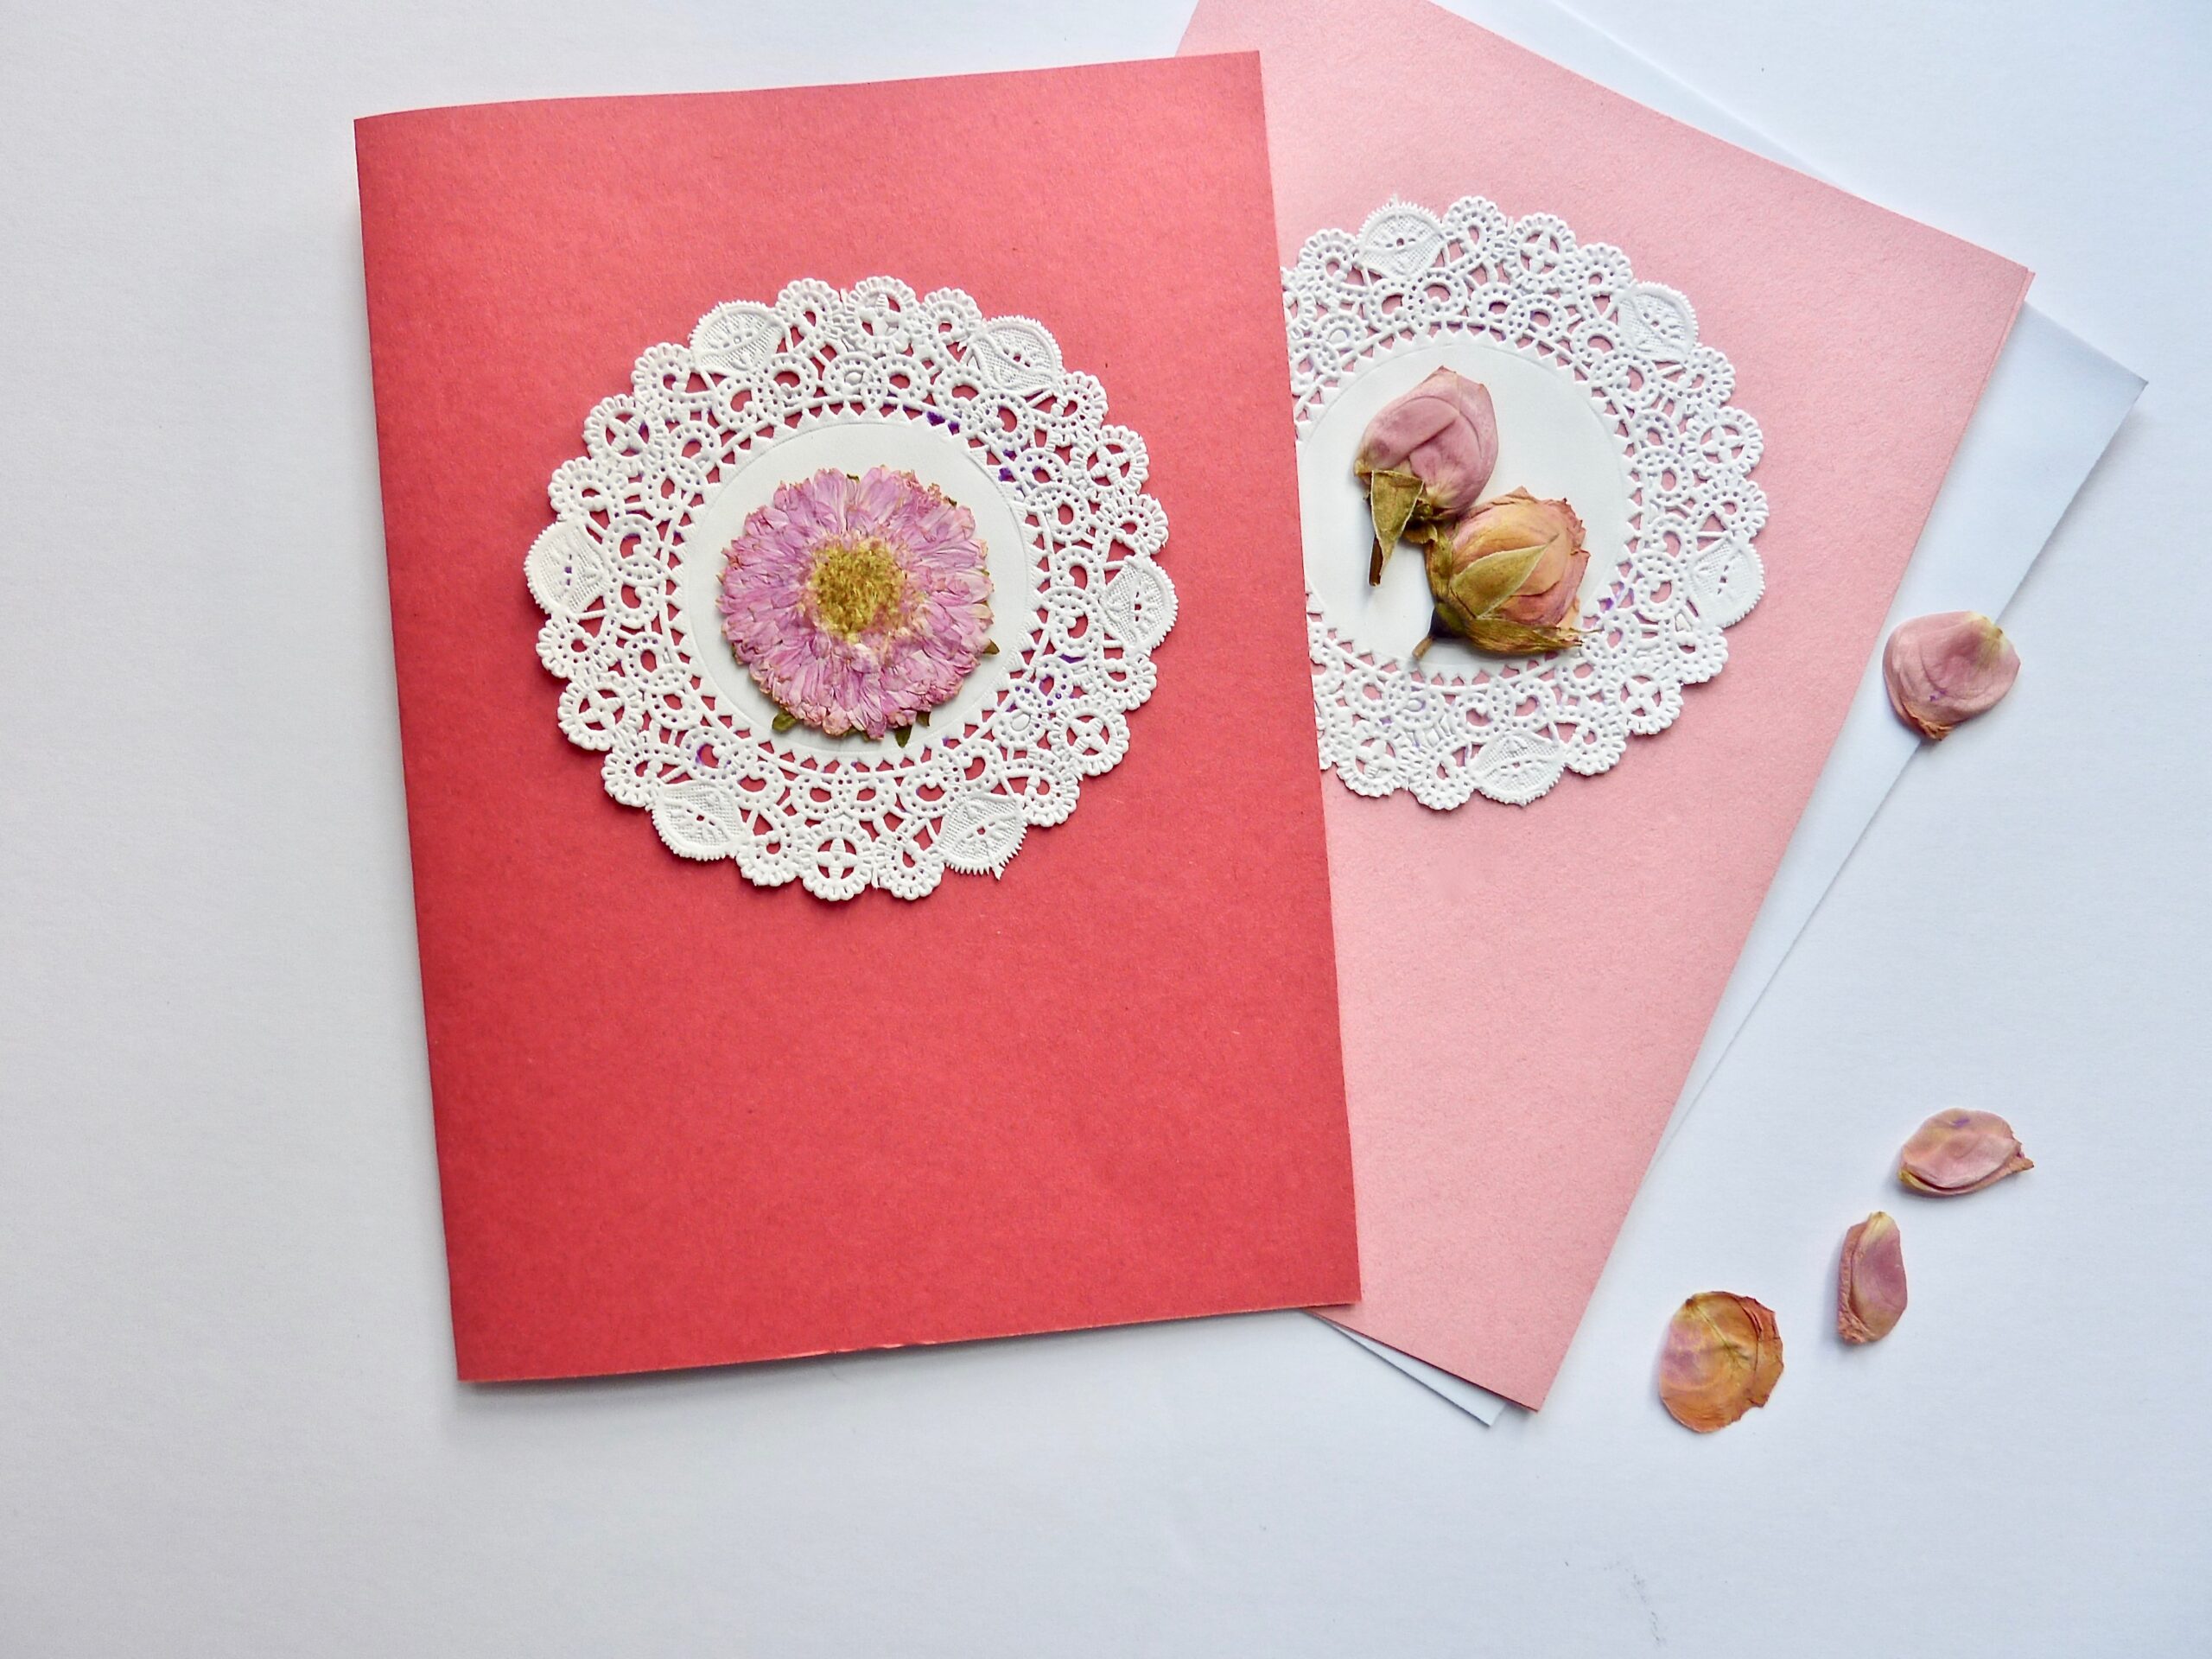 How to make a Simple Pressed Flower Valentines Card